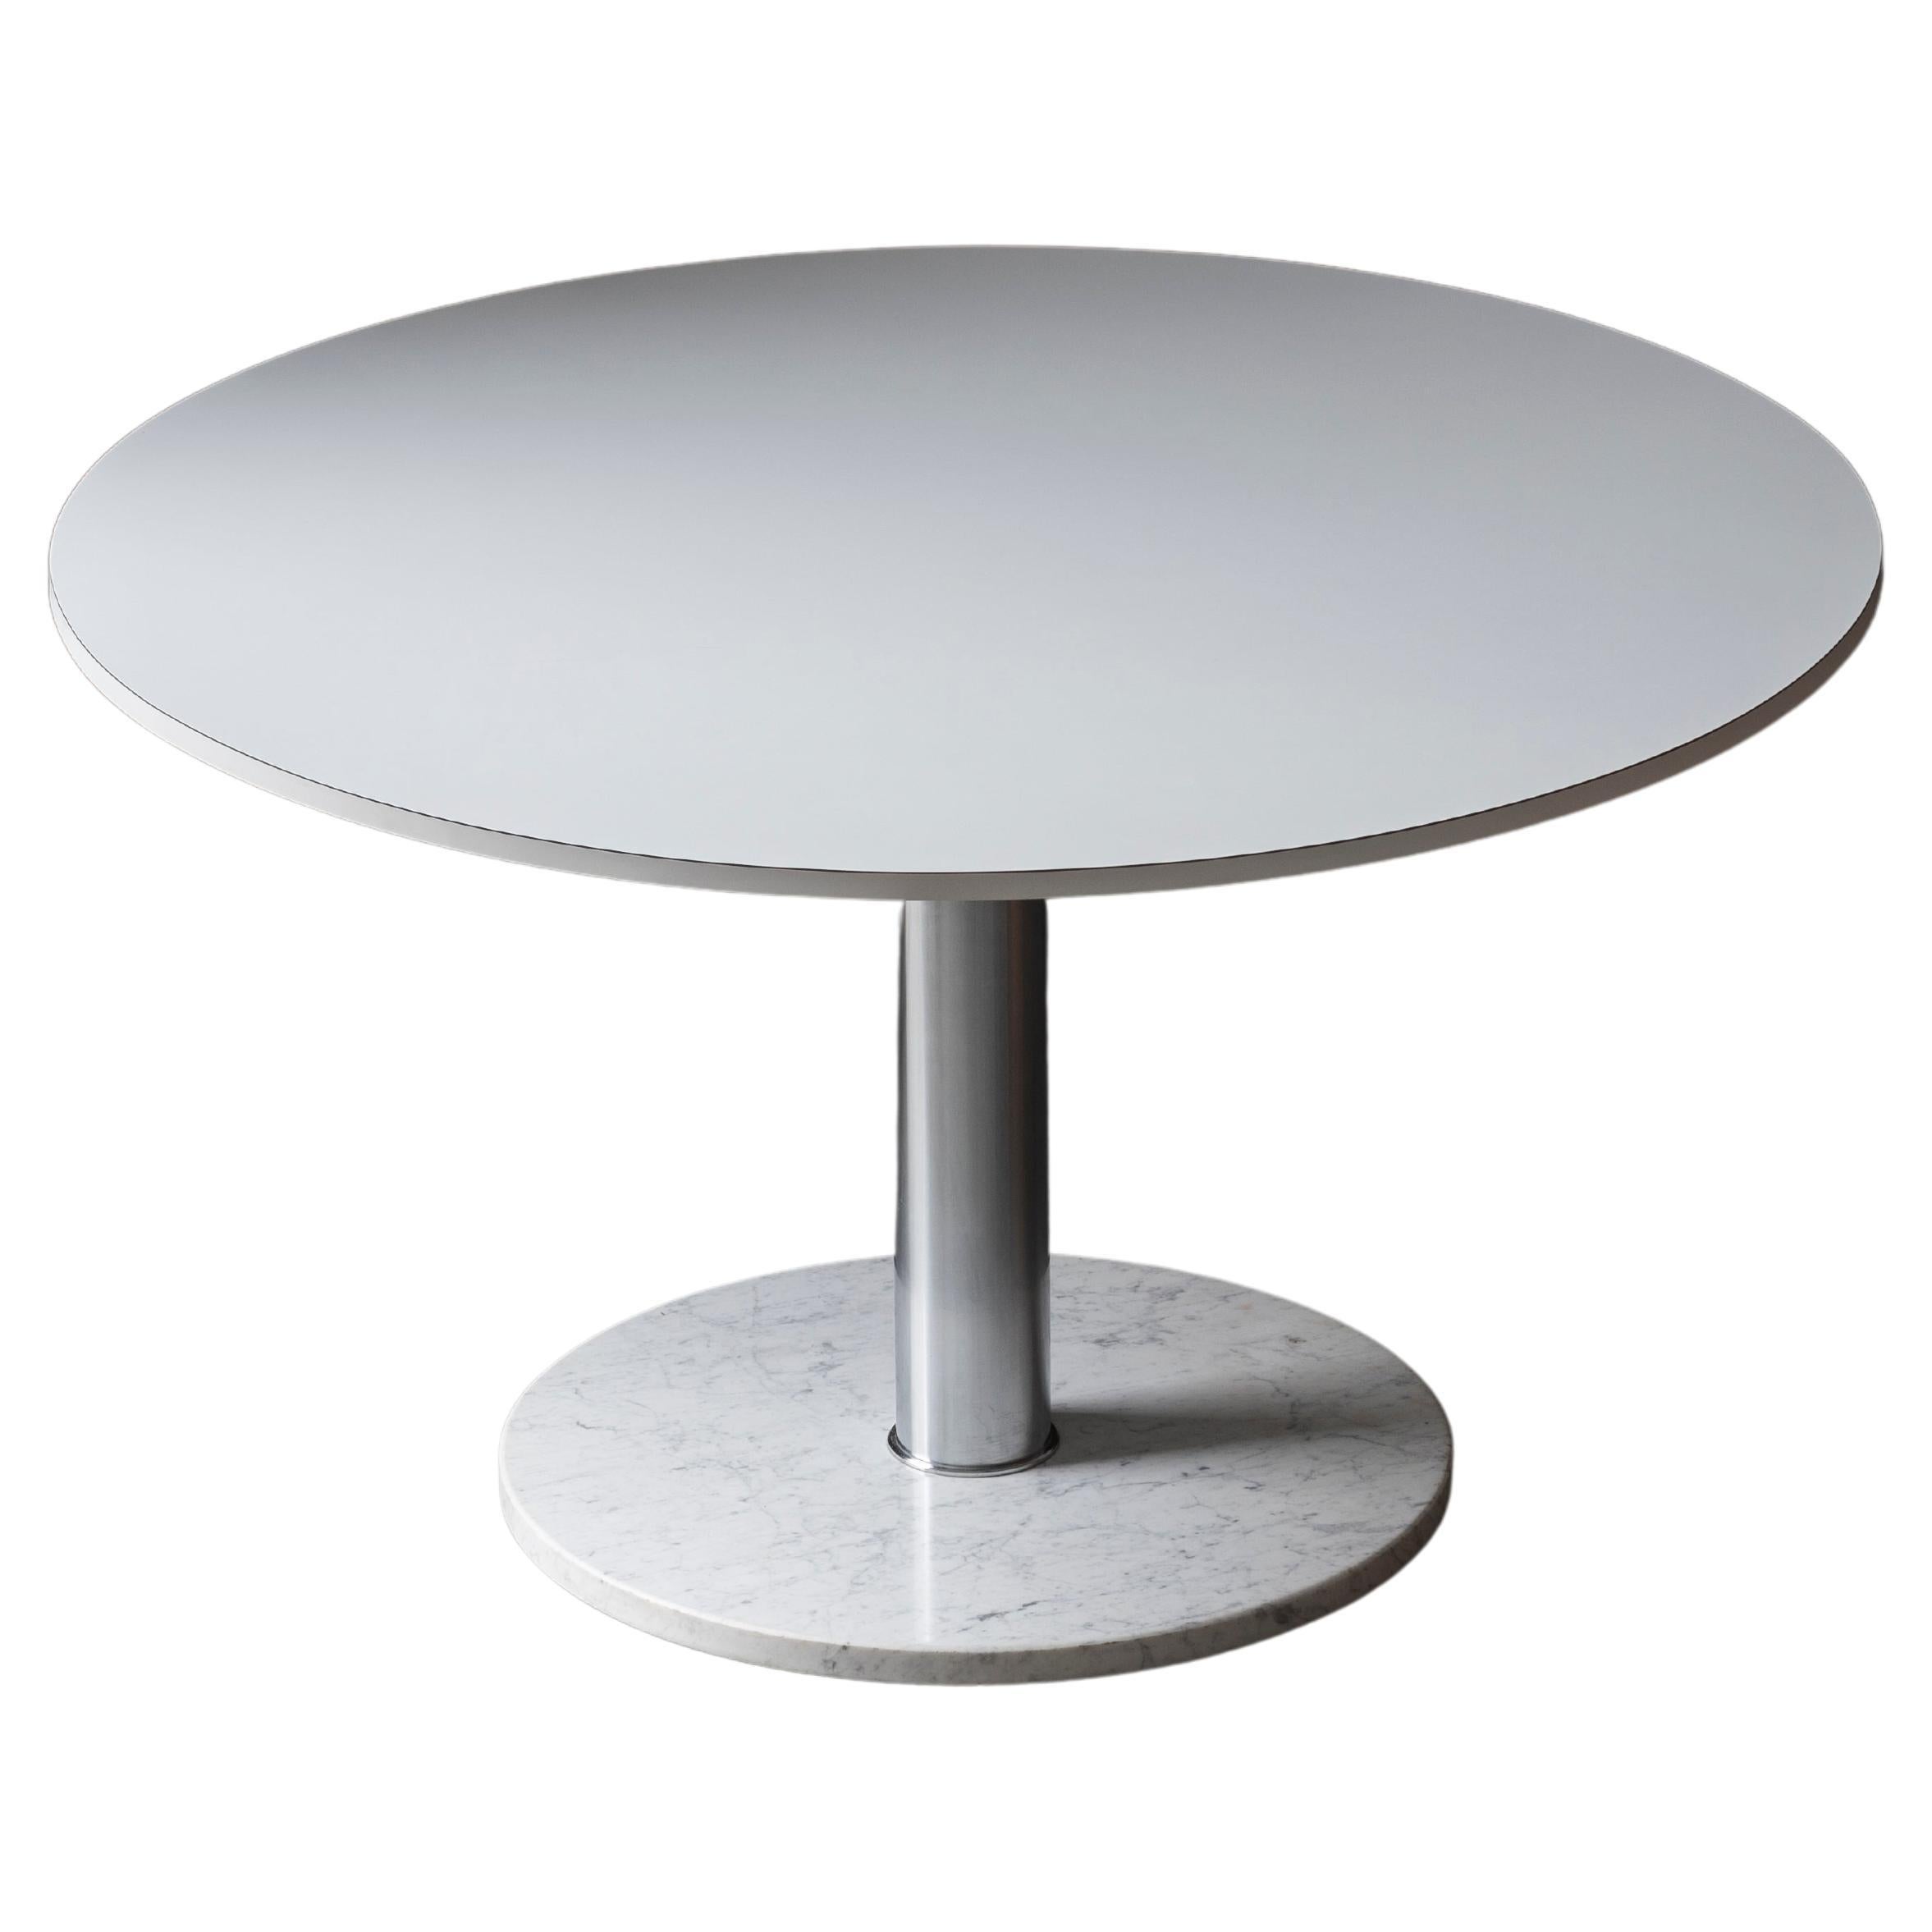 Alfred Hendrickx Dining Table with Marble Foot for Belform, Belgian design, '60s